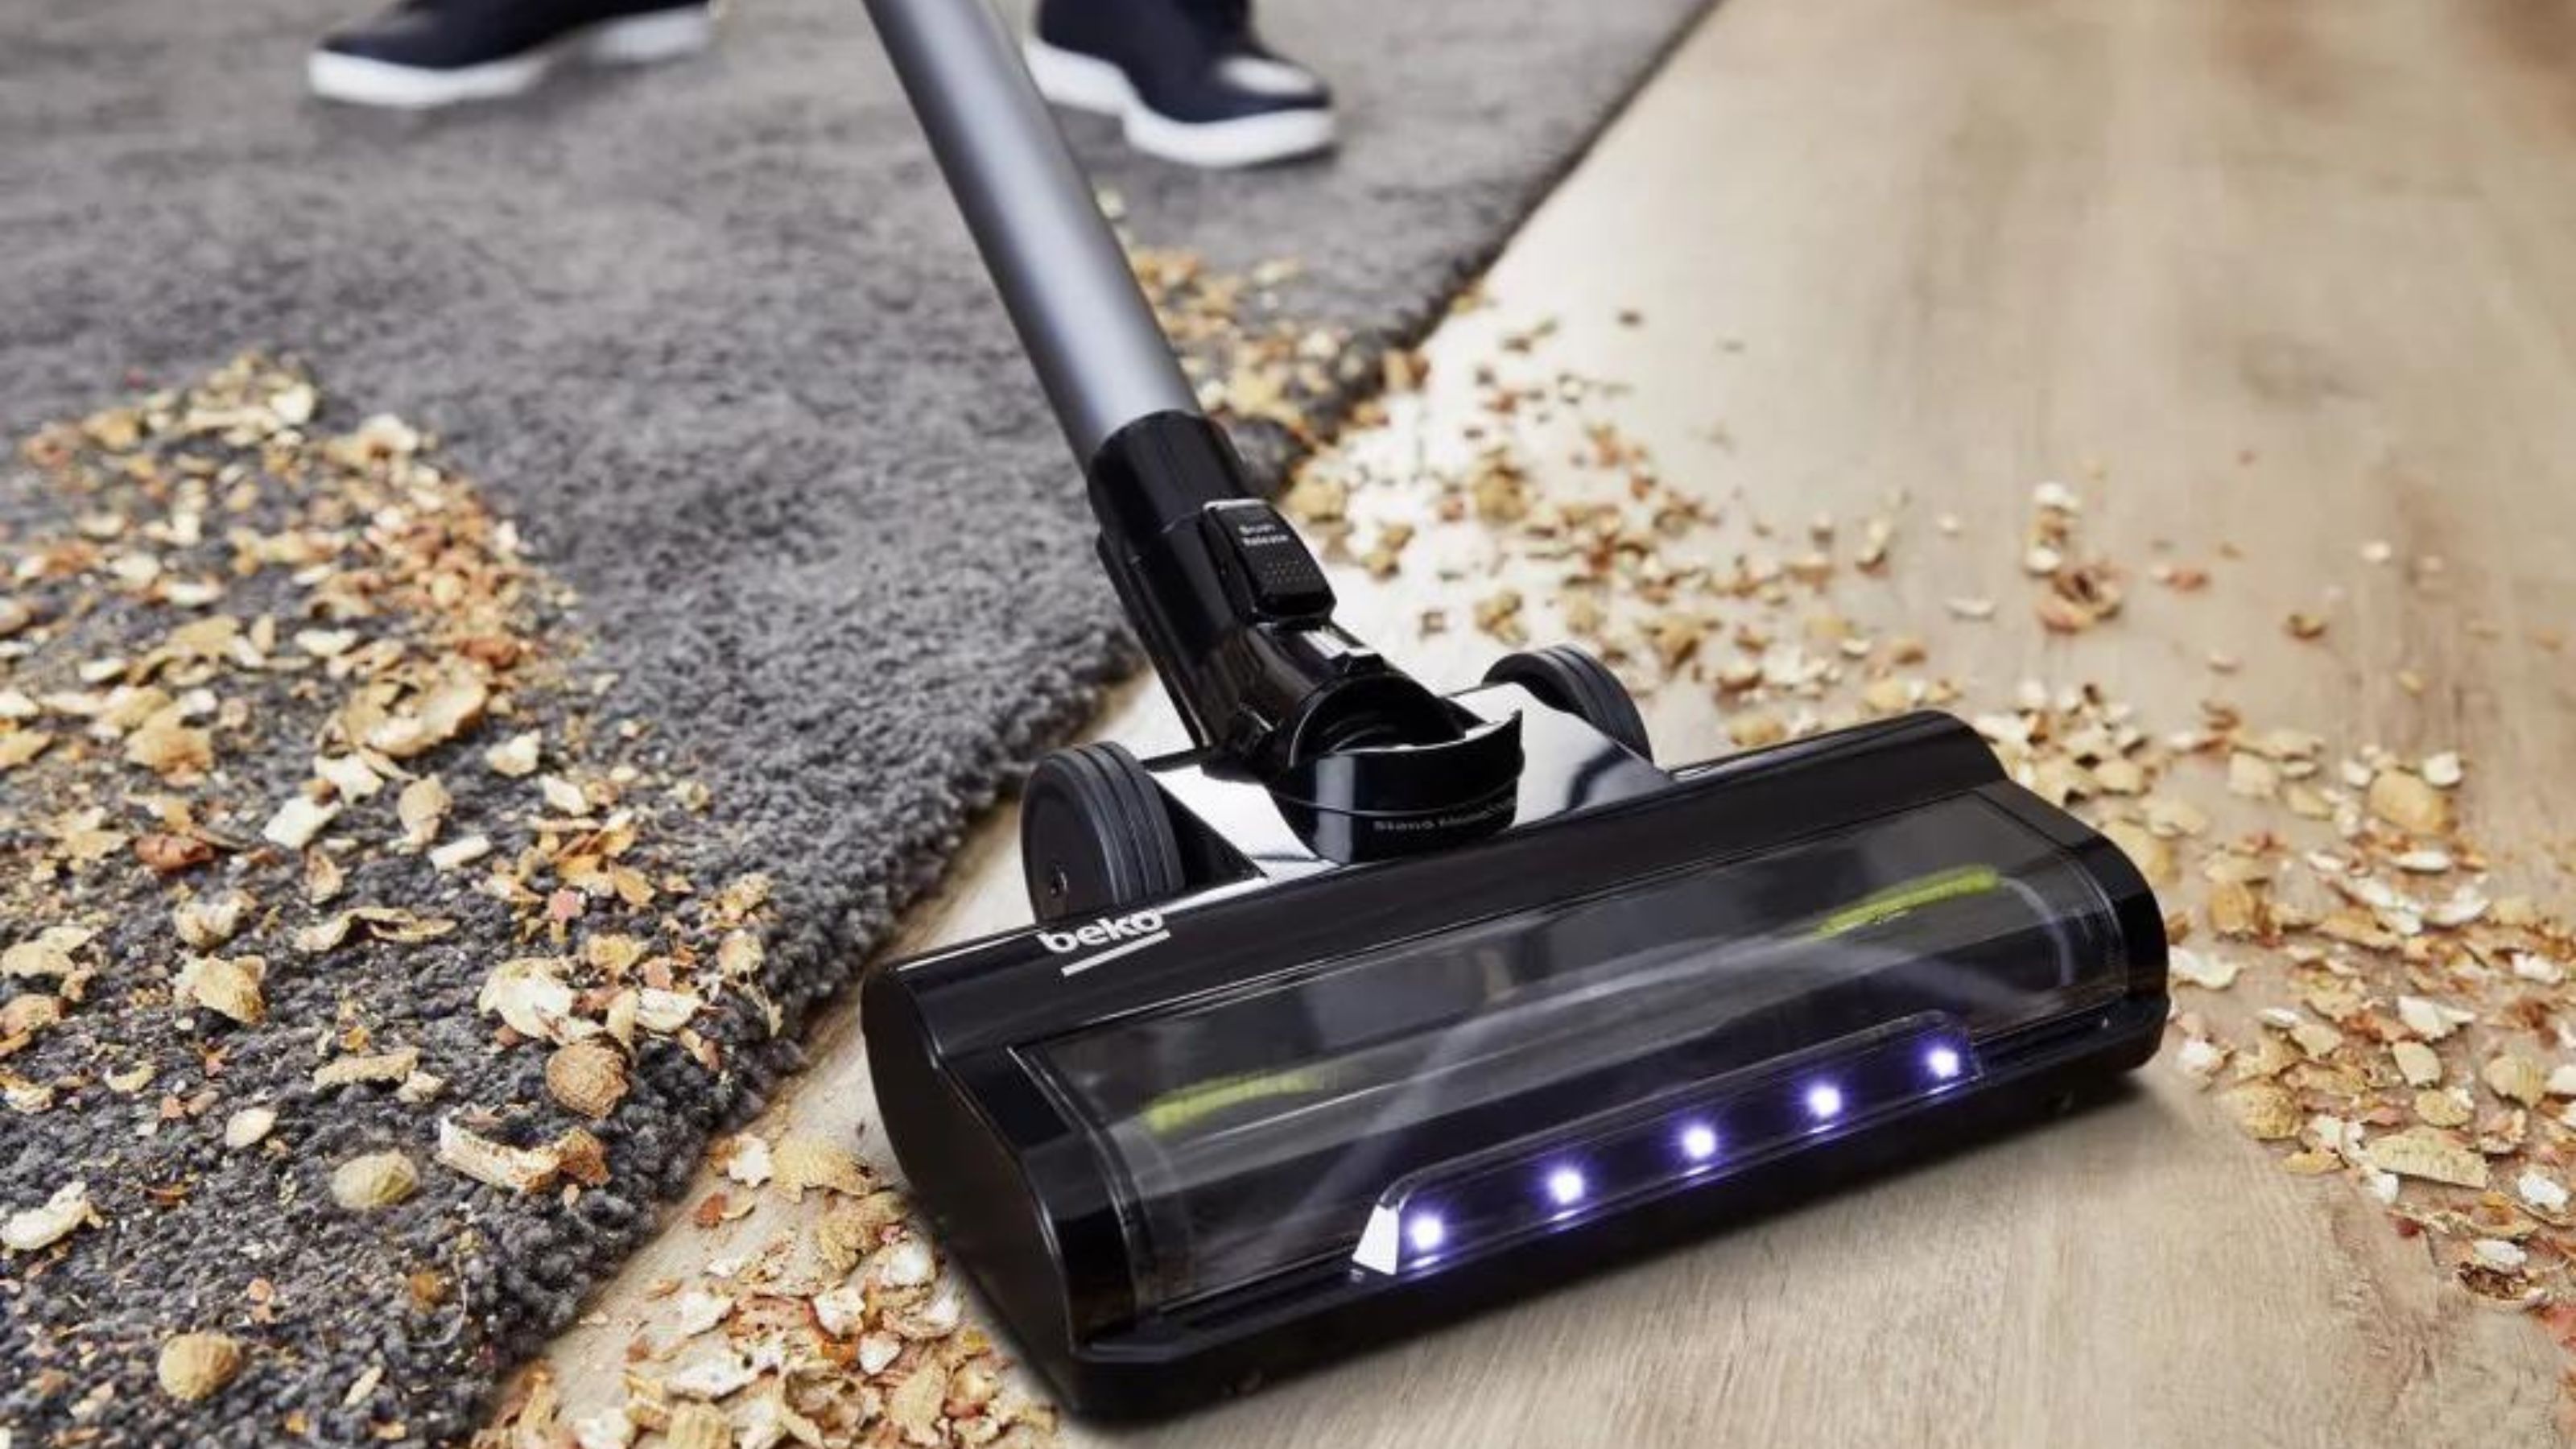 PowerCleany Vacuum Cleaner, a must have tool for outdoor. [Video]